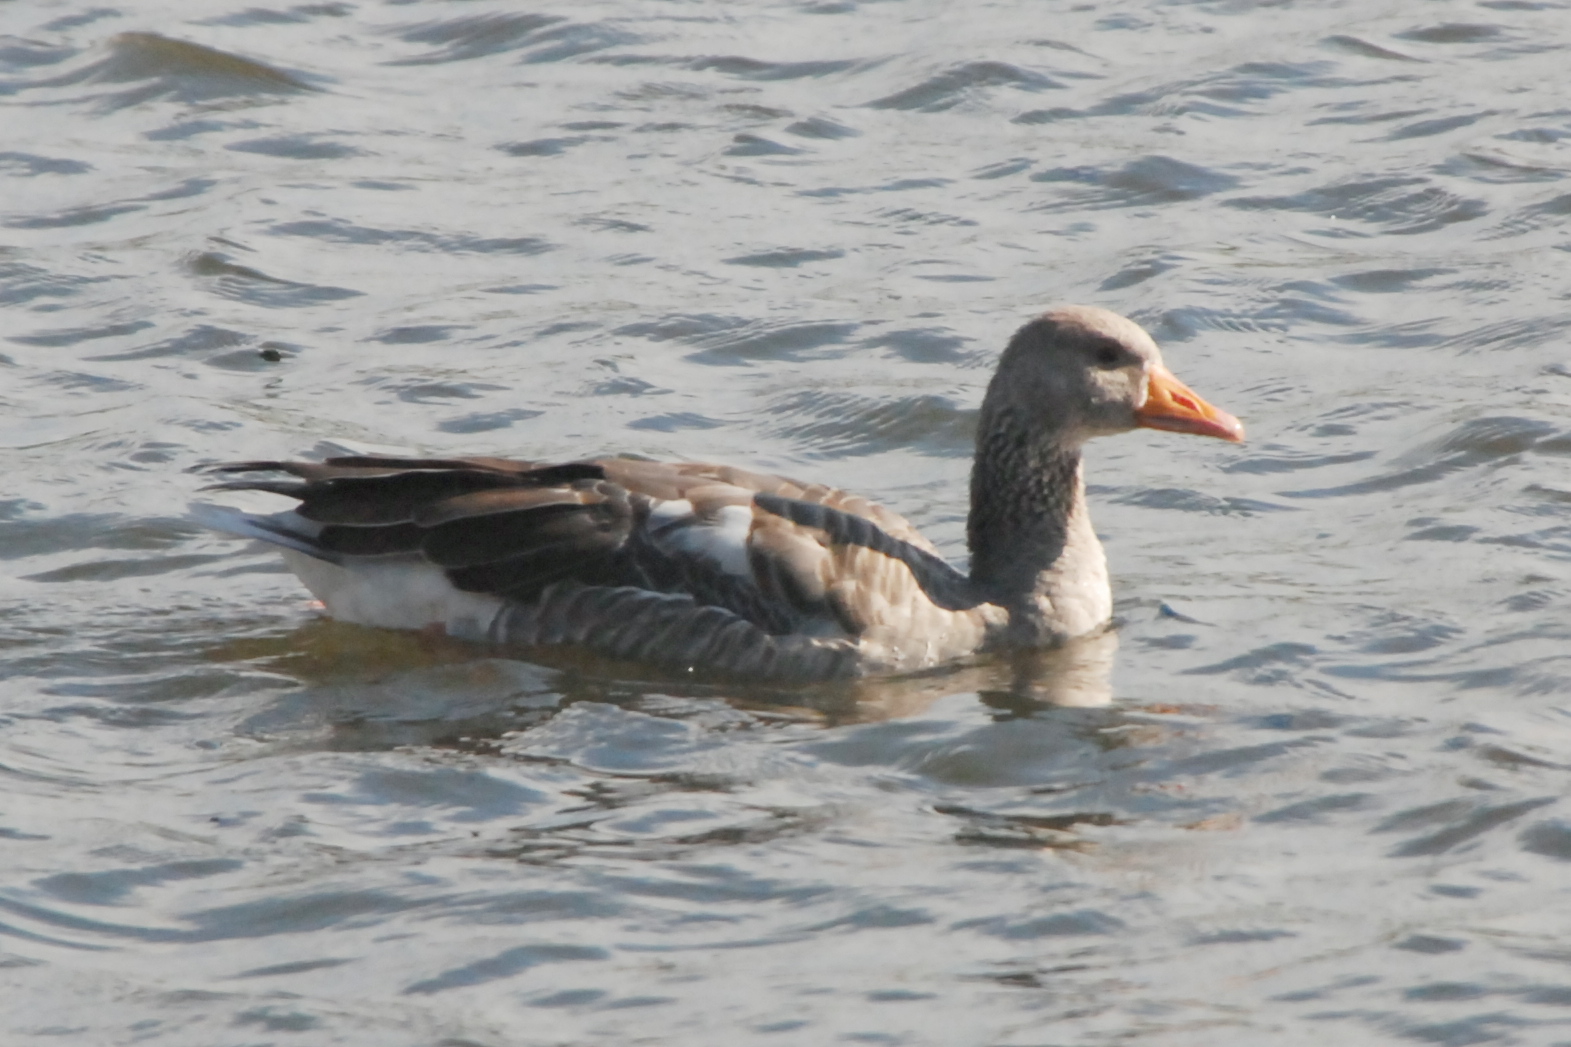 Click picture to see more Greylag Geese.